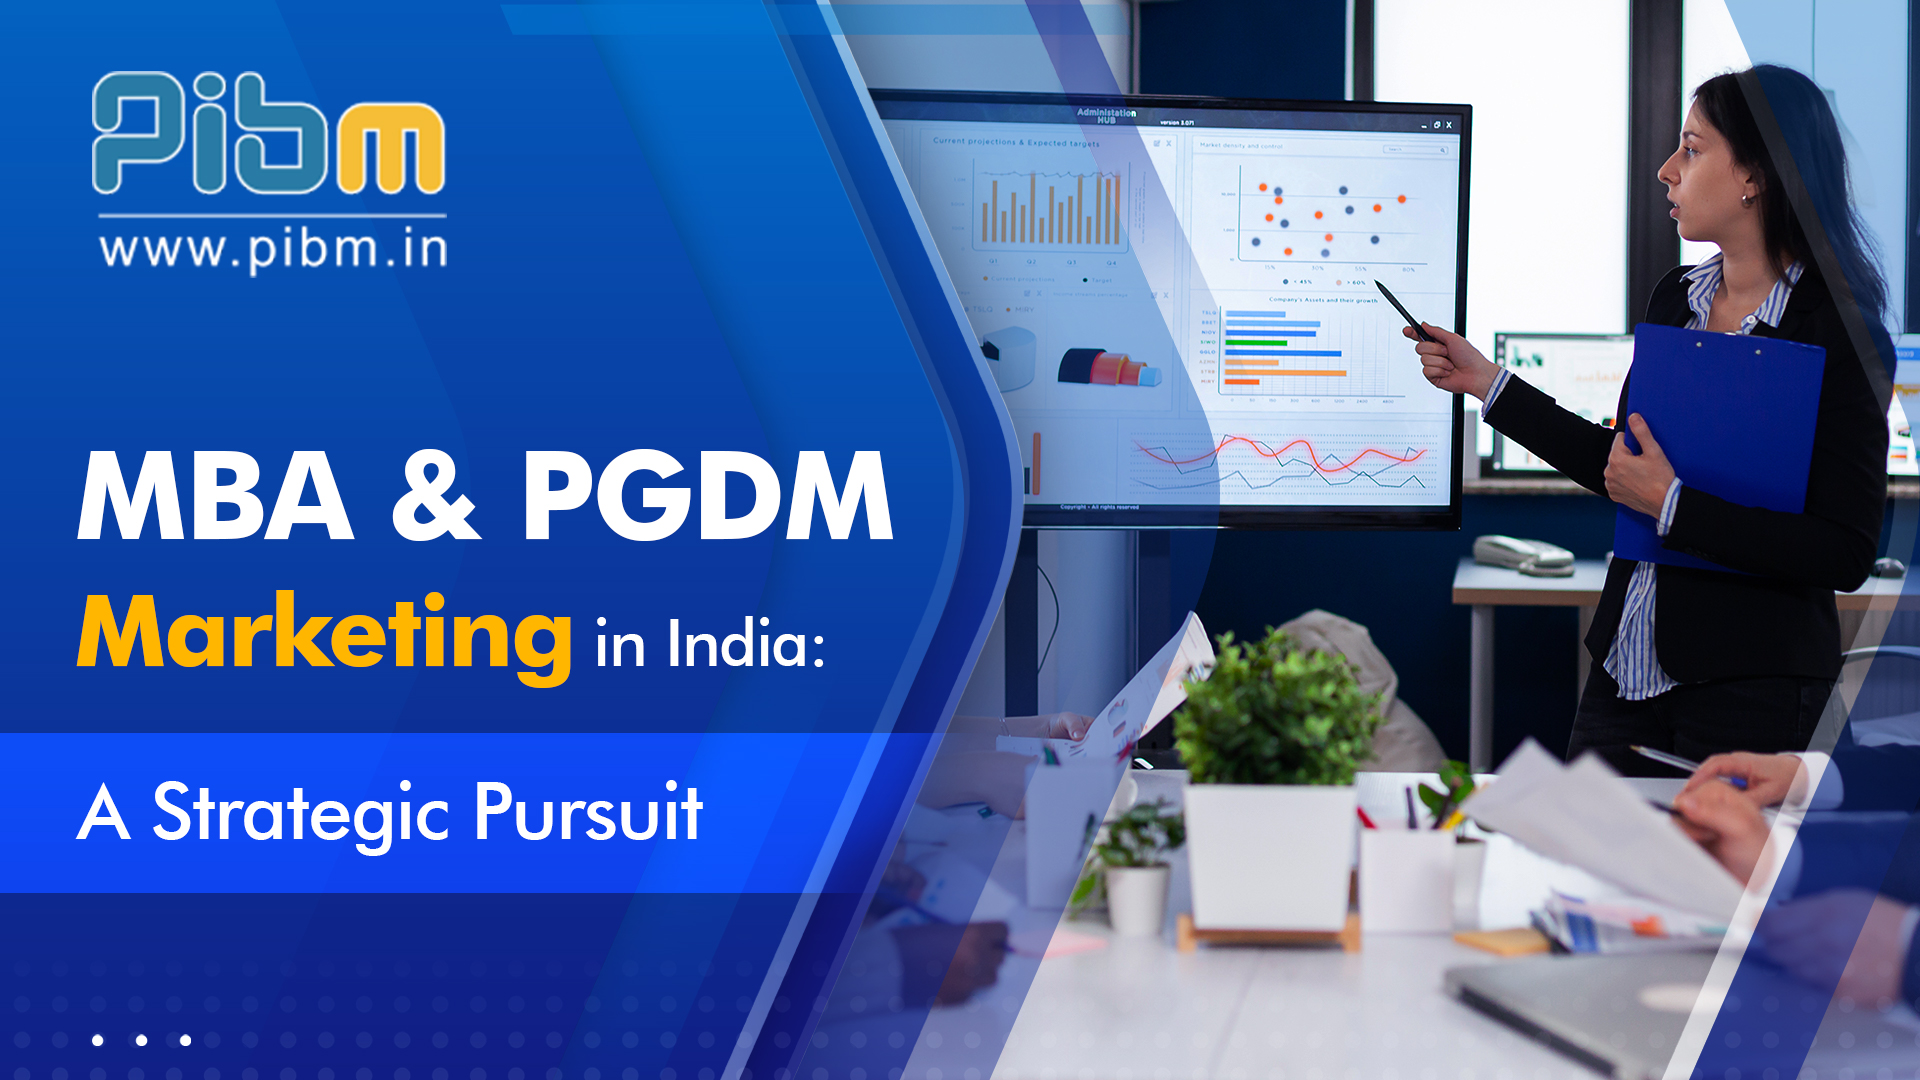 Top 10 reasons why PIBM is the perfect B-School to pursue an MBA or PGDM